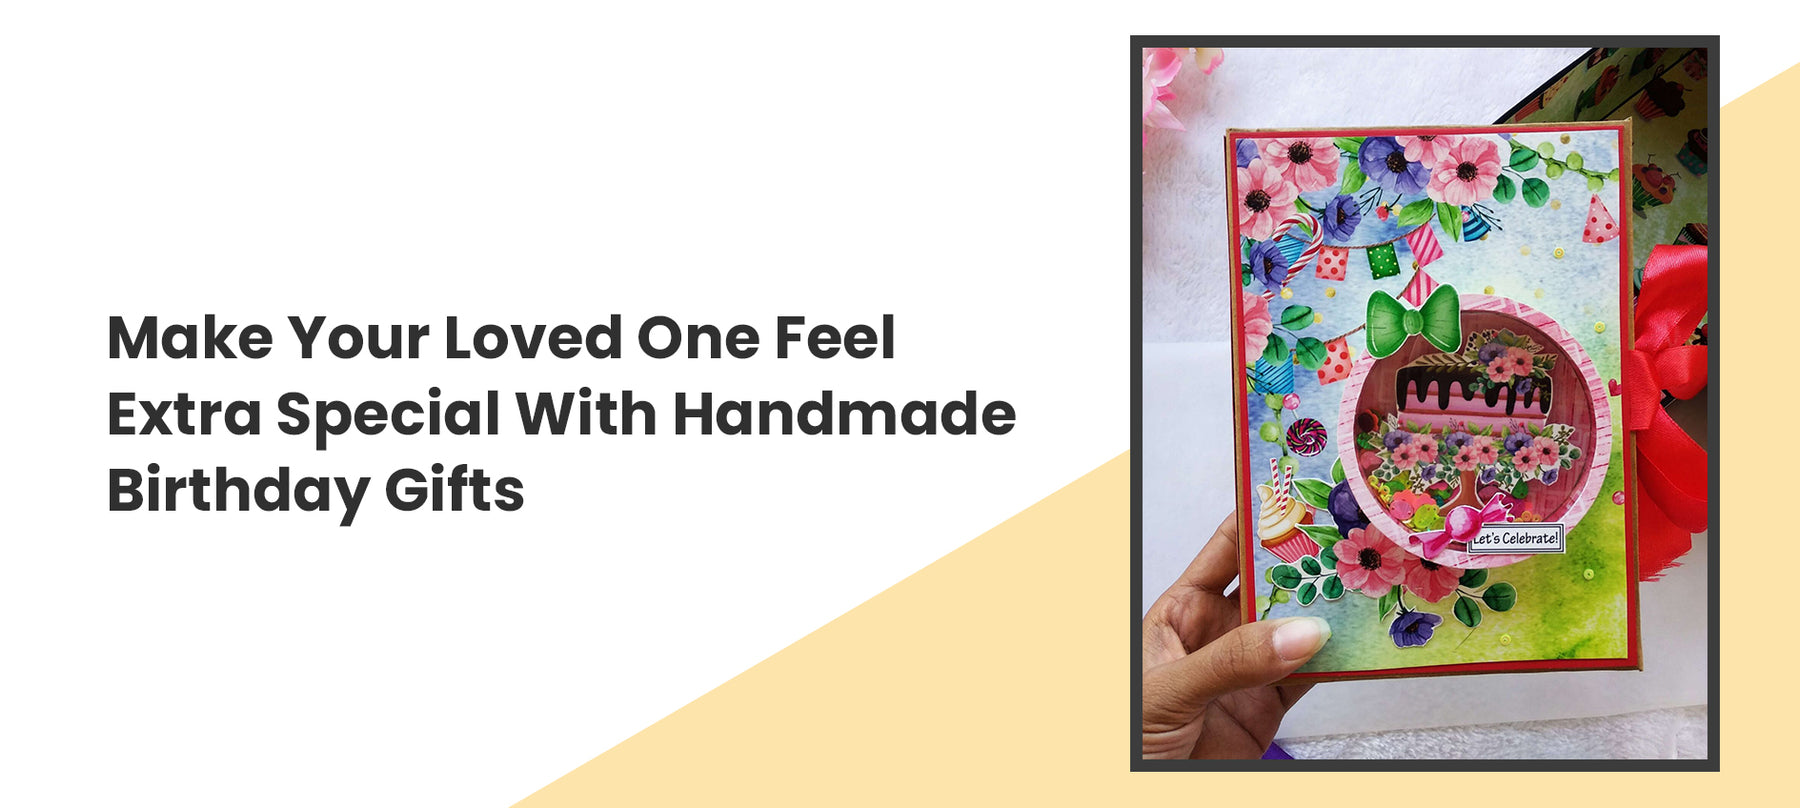 Make Your Loved One Feel Extra Special With Handmade Birthday Gifts